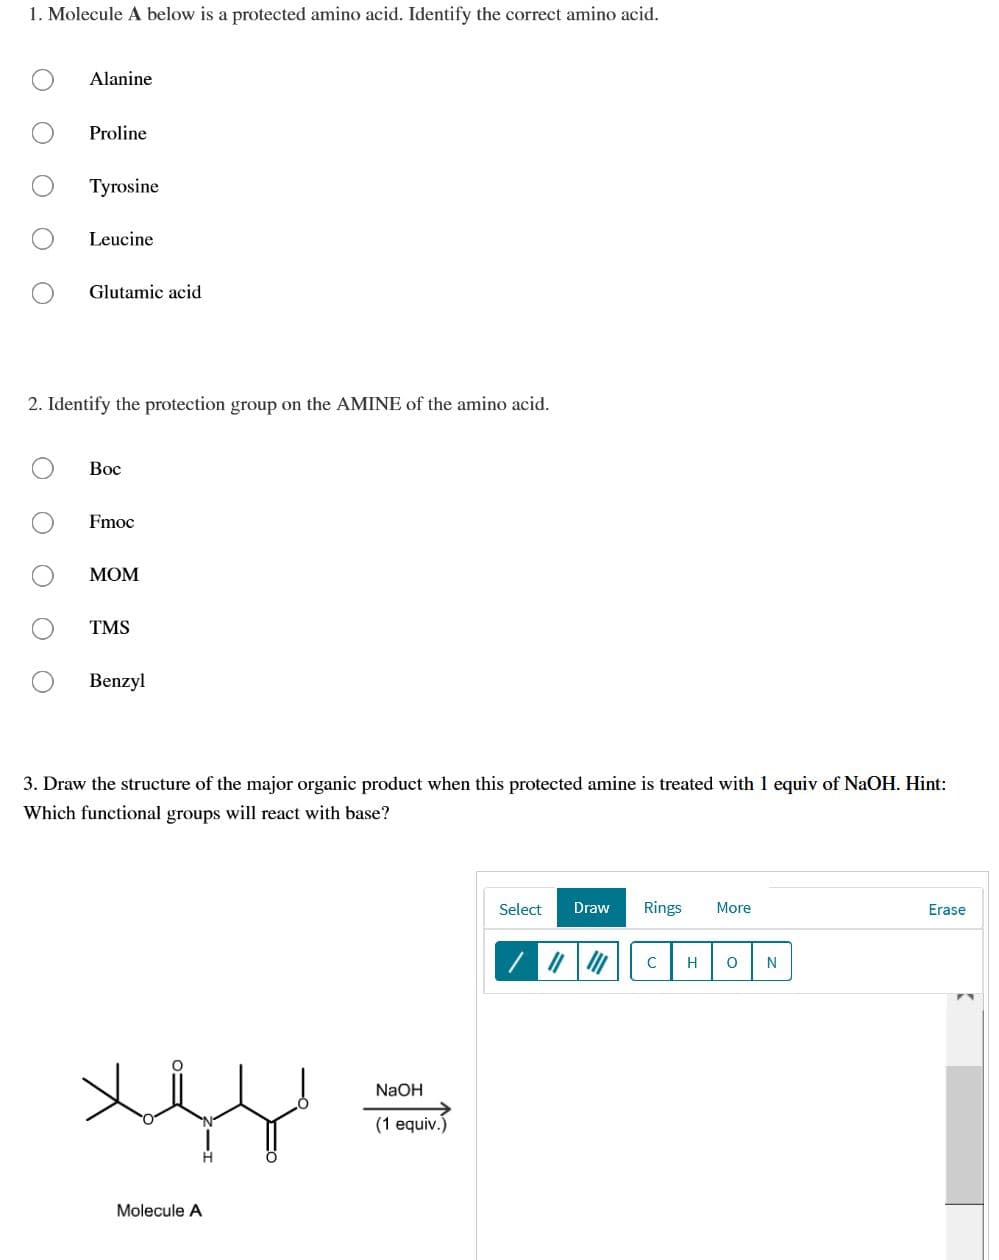 1. Molecule A below is a protected amino acid. Identify the correct amino acid.
Alanine
Proline
Tyrosine
Leucine
Glutamic acid
2. Identify the protection group on the AMINE of the amino acid.
Вос
Fmoc
МОМ
TMS
Benzyl
3. Draw the structure of the major organic product when this protected amine is treated with 1 equiv of NaOH. Hint:
Which functional groups will react with base?
Select
Draw
Rings
More
Erase
C
NaOH
(1 equiv.)
Molecule A
